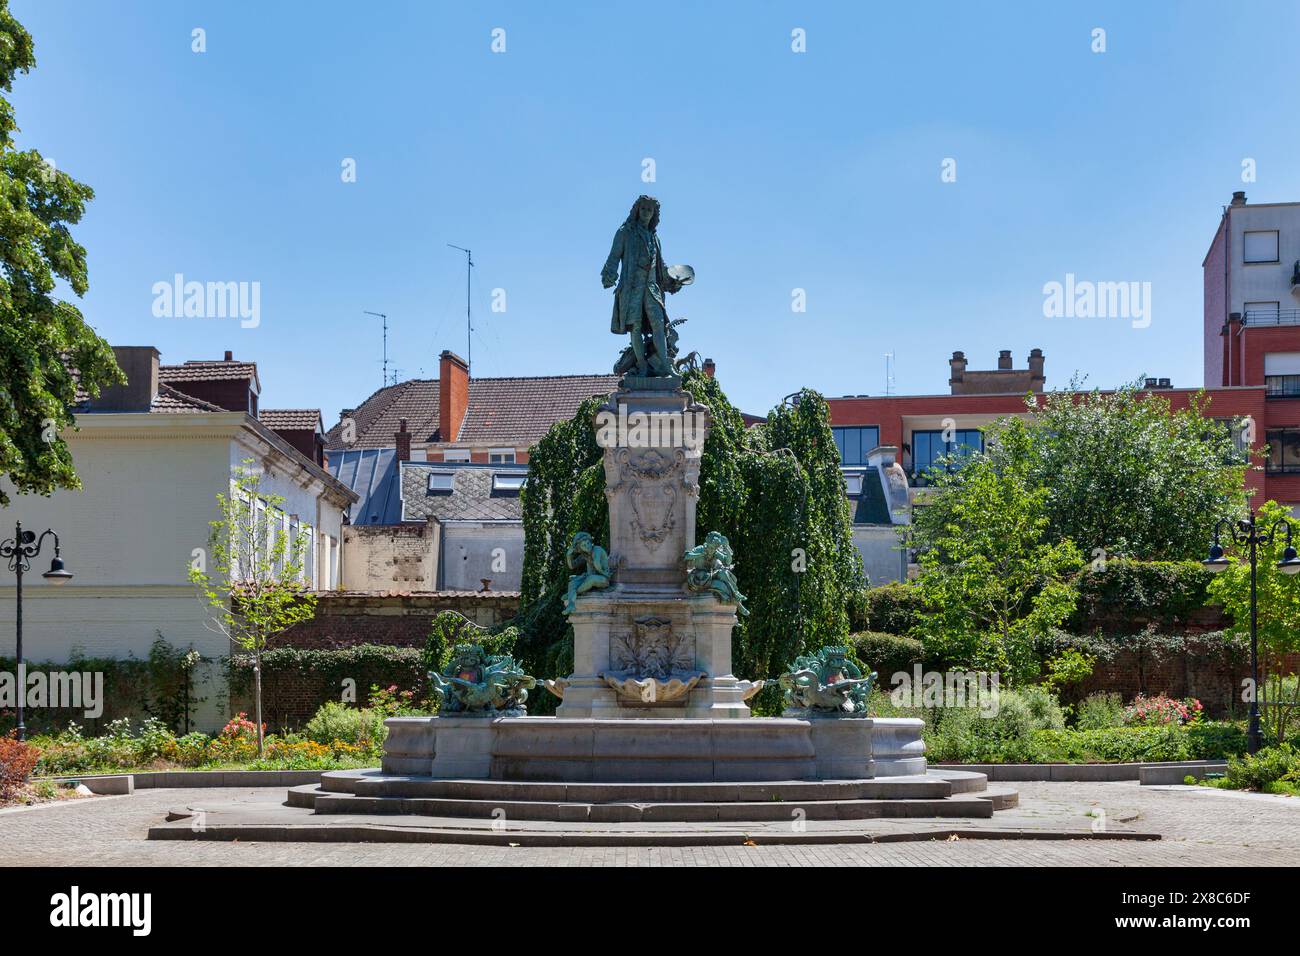 Valenciennes, France - June 23 2020: The Monument to Watteau by sculptor Carpeaux was inaugurated in 1884 in front of the Saint-Géry Church. Stock Photo